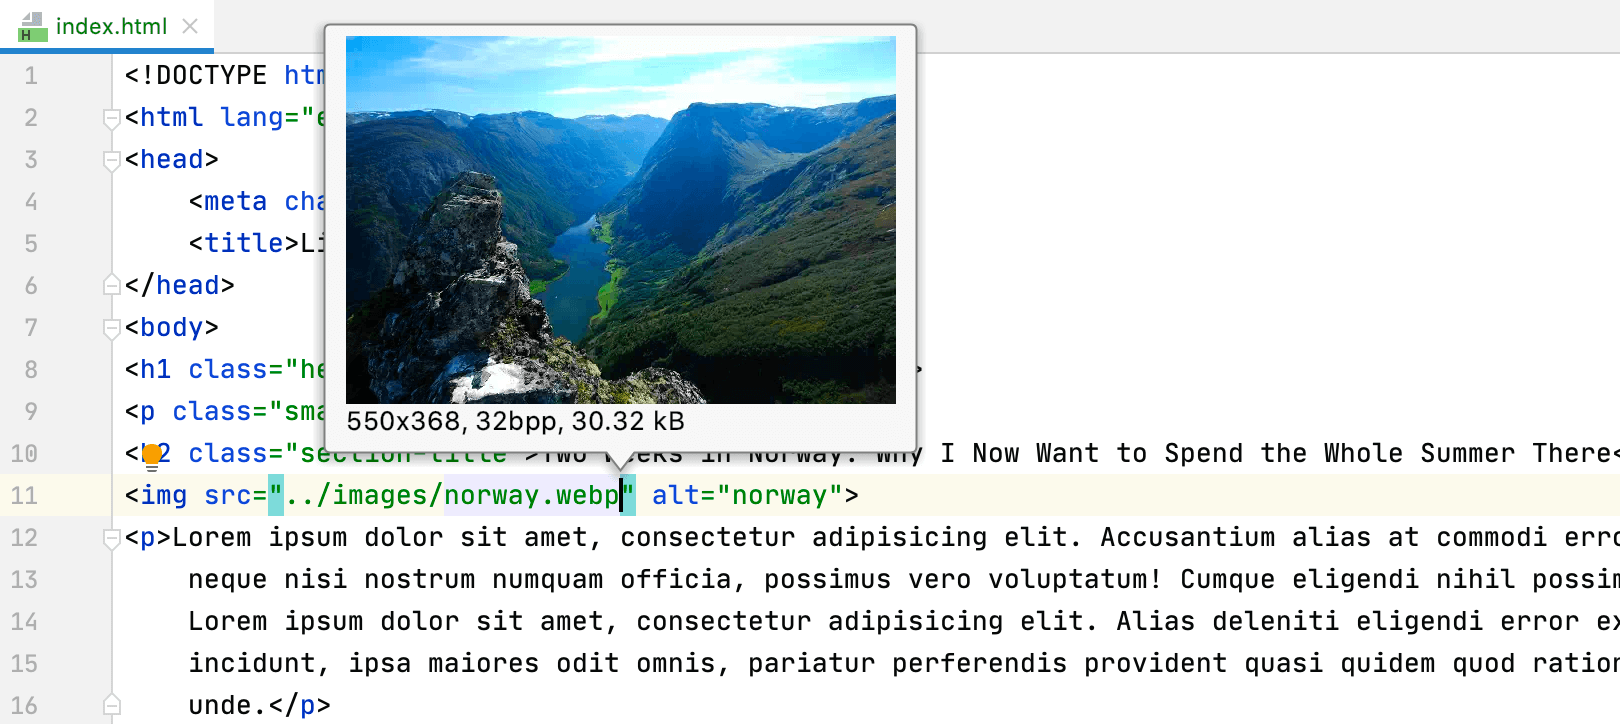 Preview WebP images in the IDE